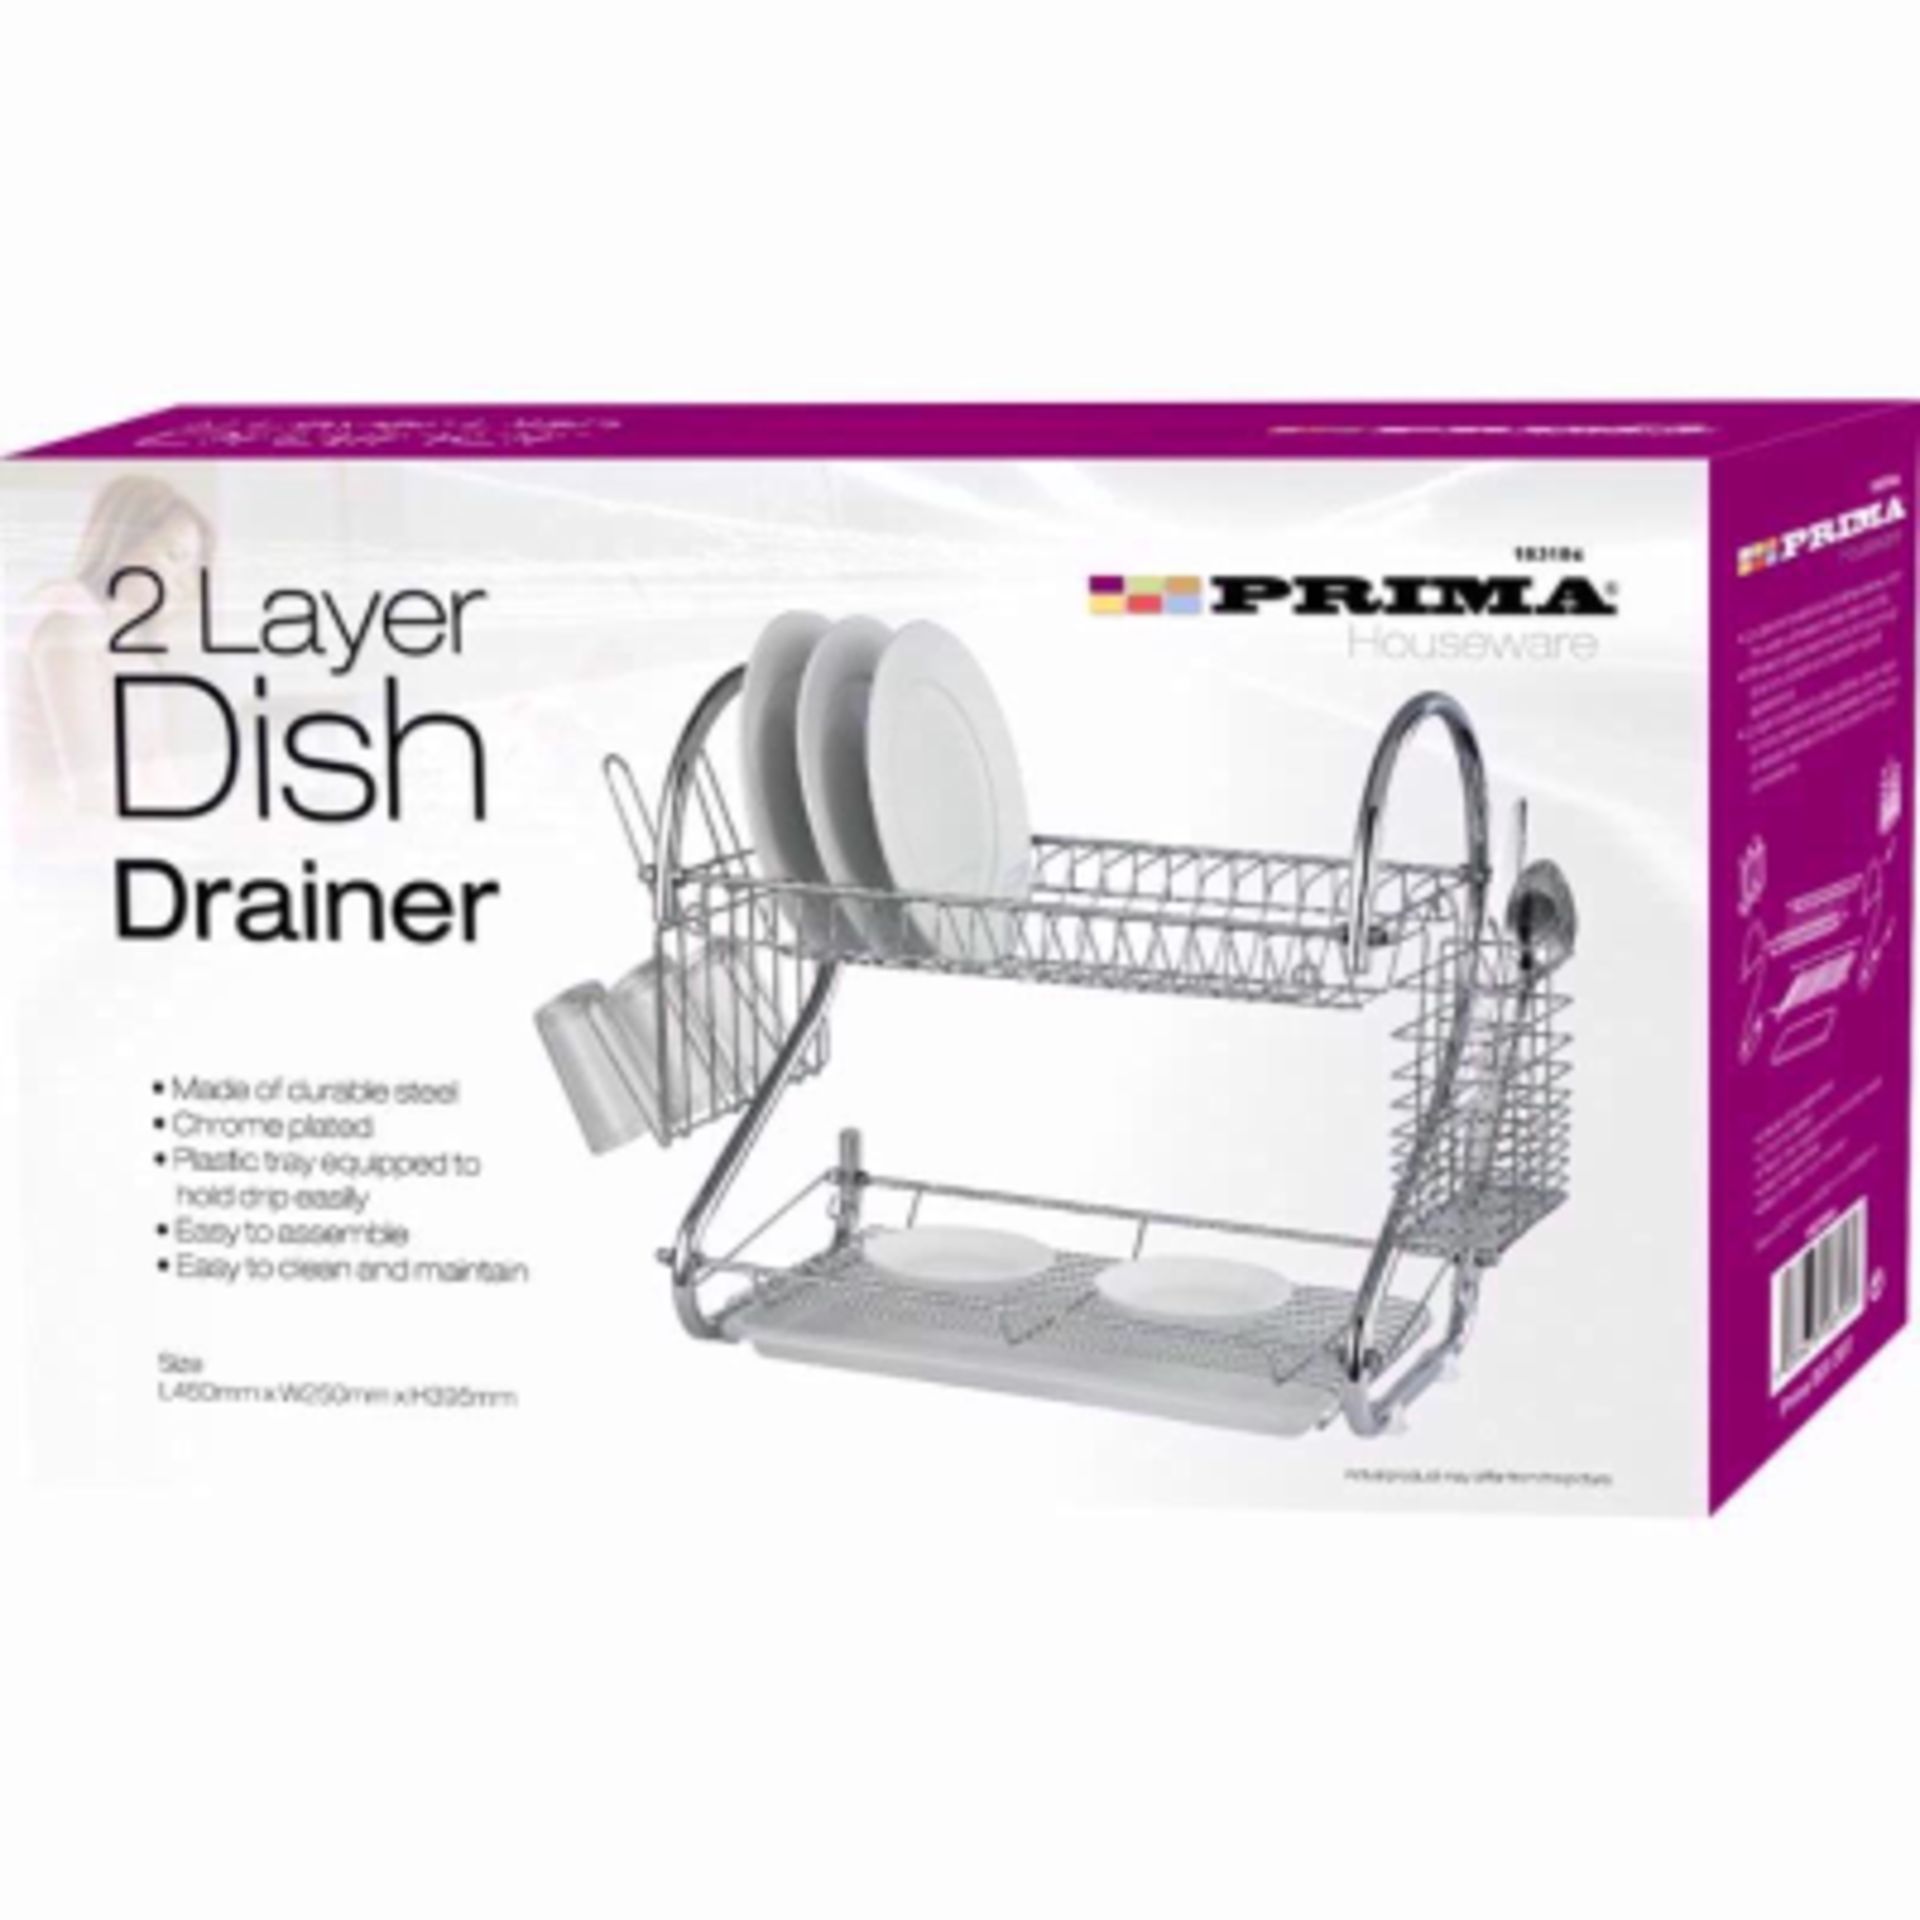 V Brand New Two Layer Chrome Plated Dish Drainer - With Plastic Tray - Easy to Assemble X 2 YOUR BID